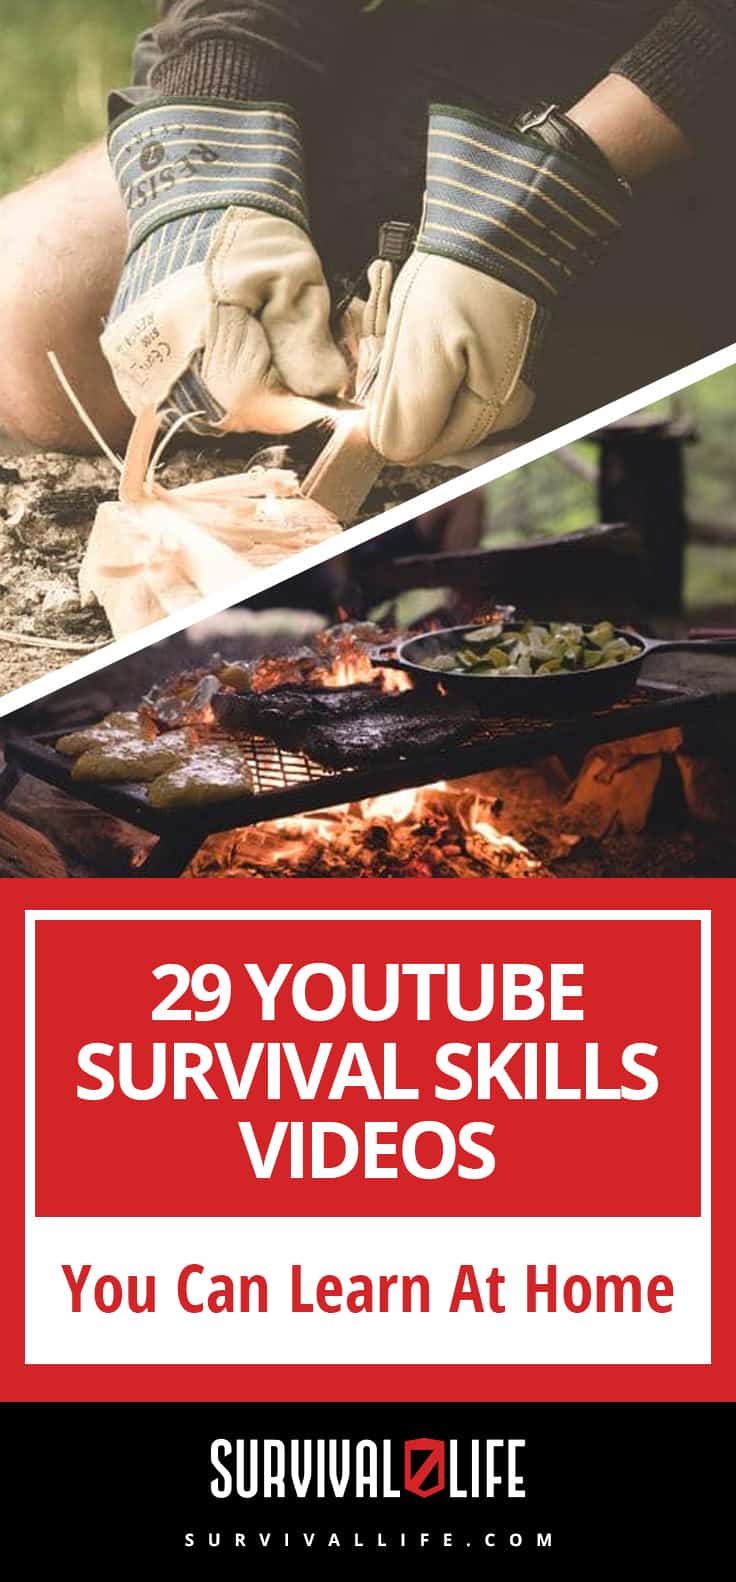 29 YouTube Survival Skills Videos You Can Learn At Home